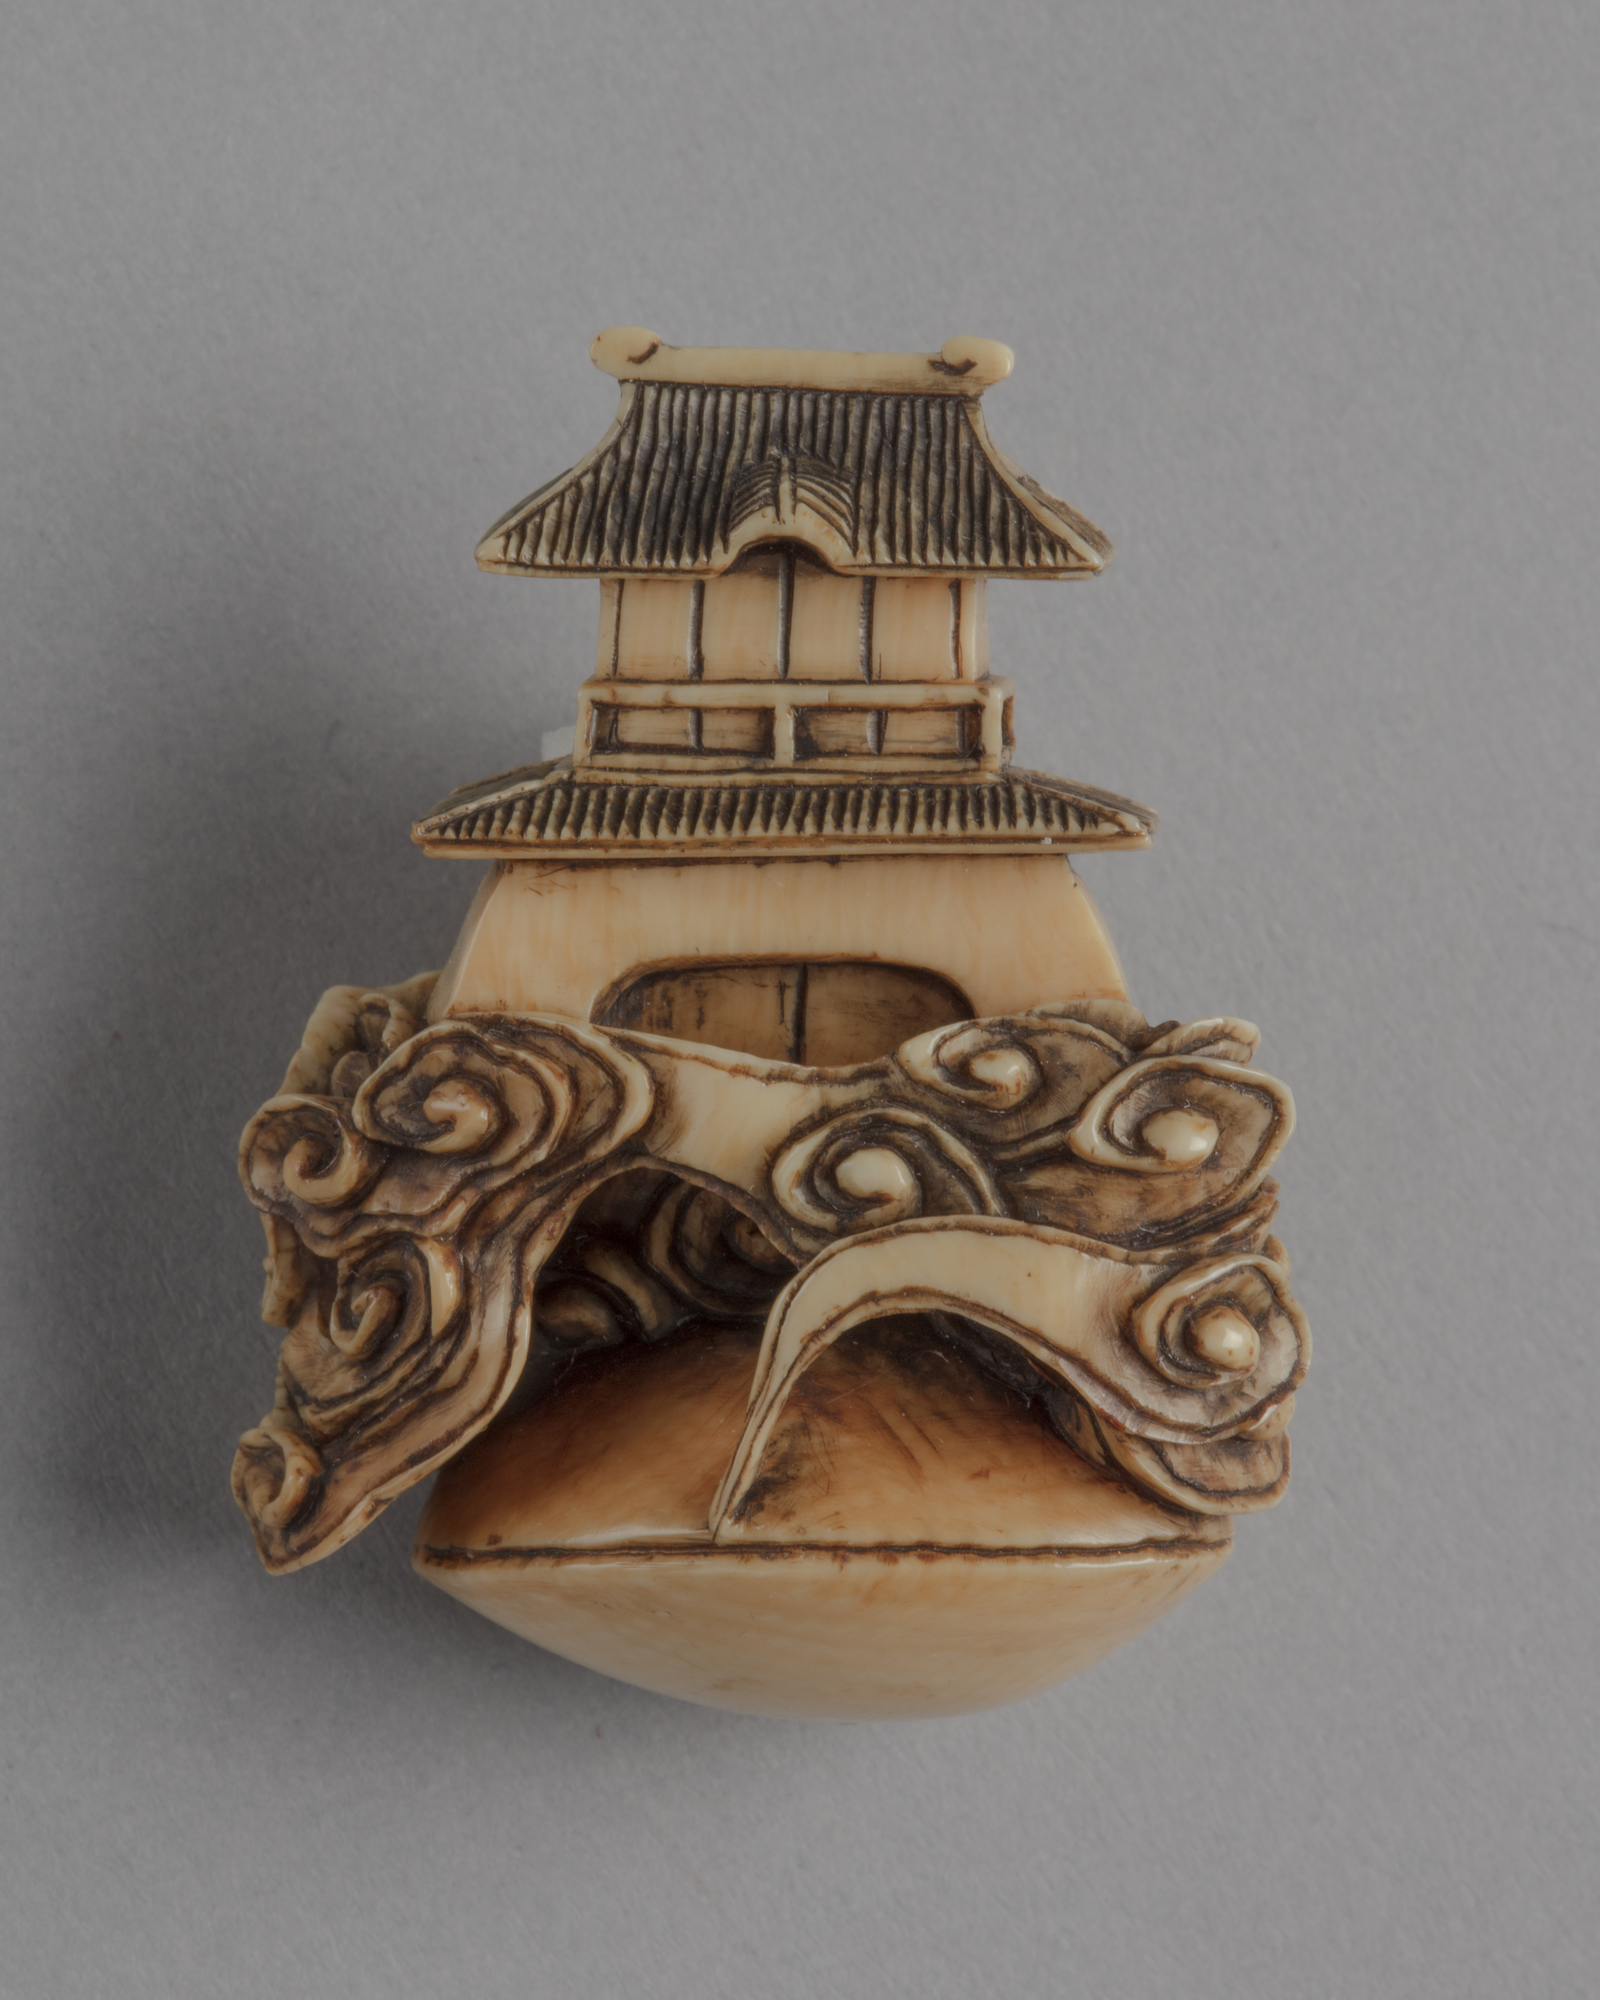 A Japanese ivory netsuke of a two-roofed gate-tower rising out of clouds emerging from a closed clam shell.